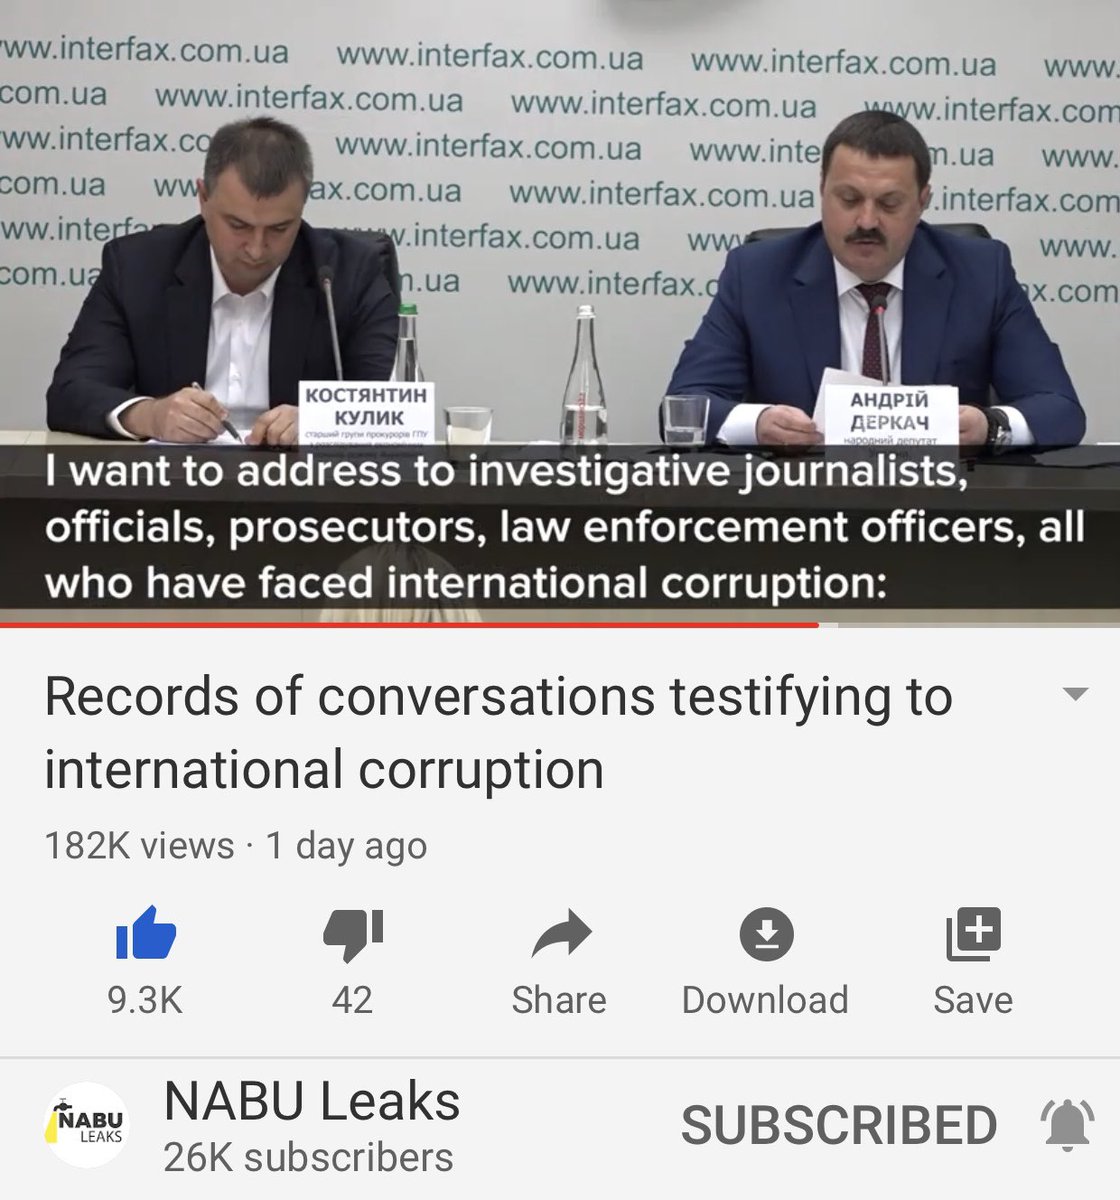 He’s discussing how the US laundered money into Ukraine via Biden and others and he’s asking those who have knowledge of this corruption to come forward